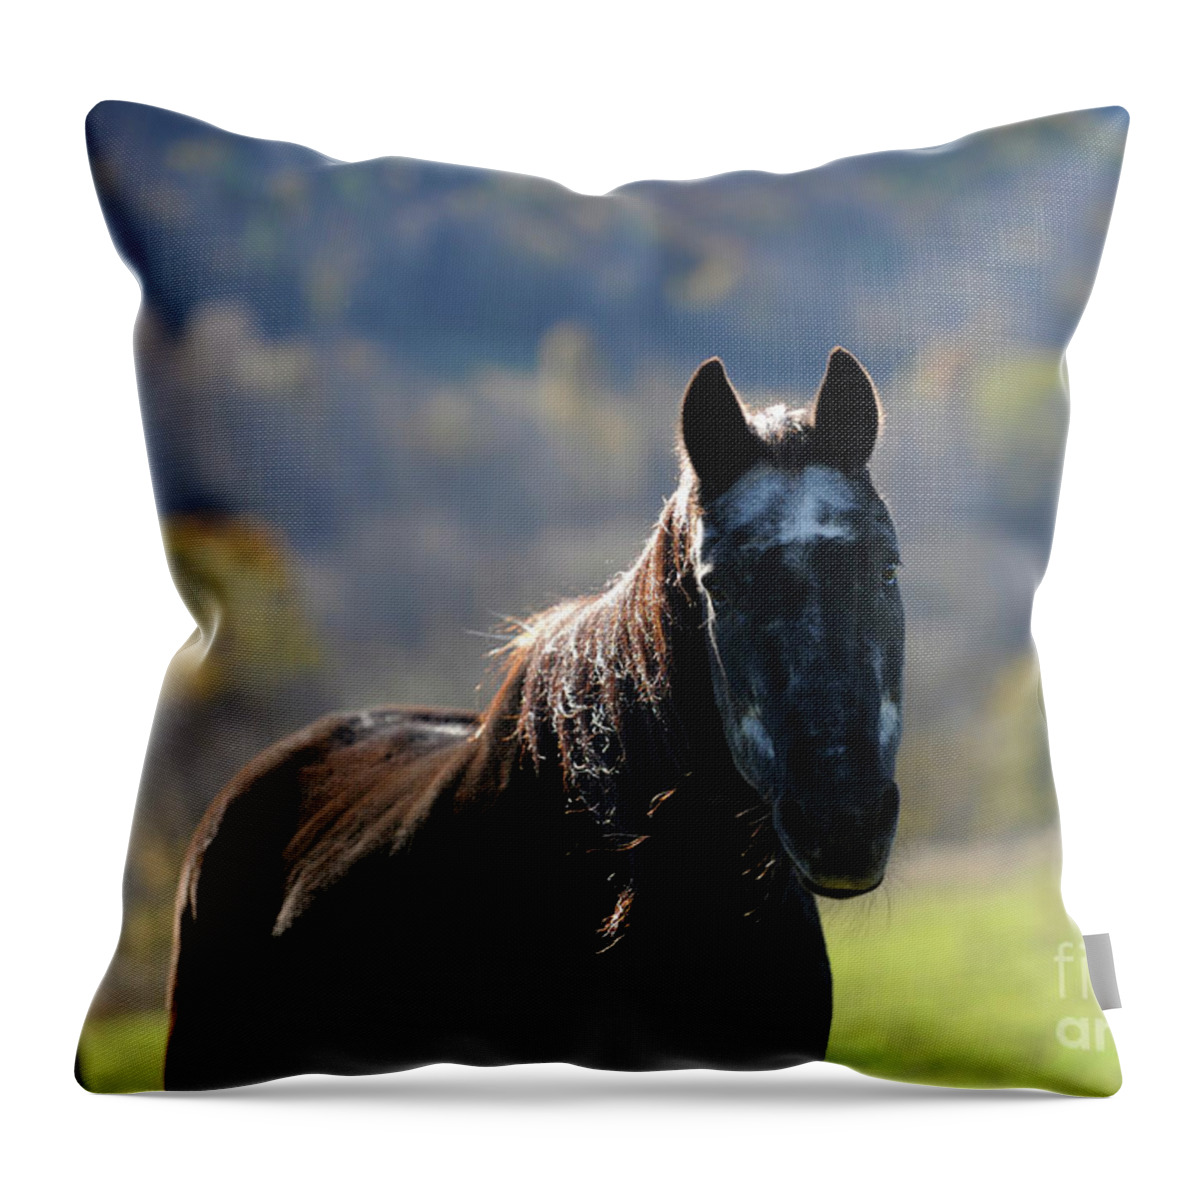 Rosemary Farm Throw Pillow featuring the photograph Oliver #1 by Carien Schippers